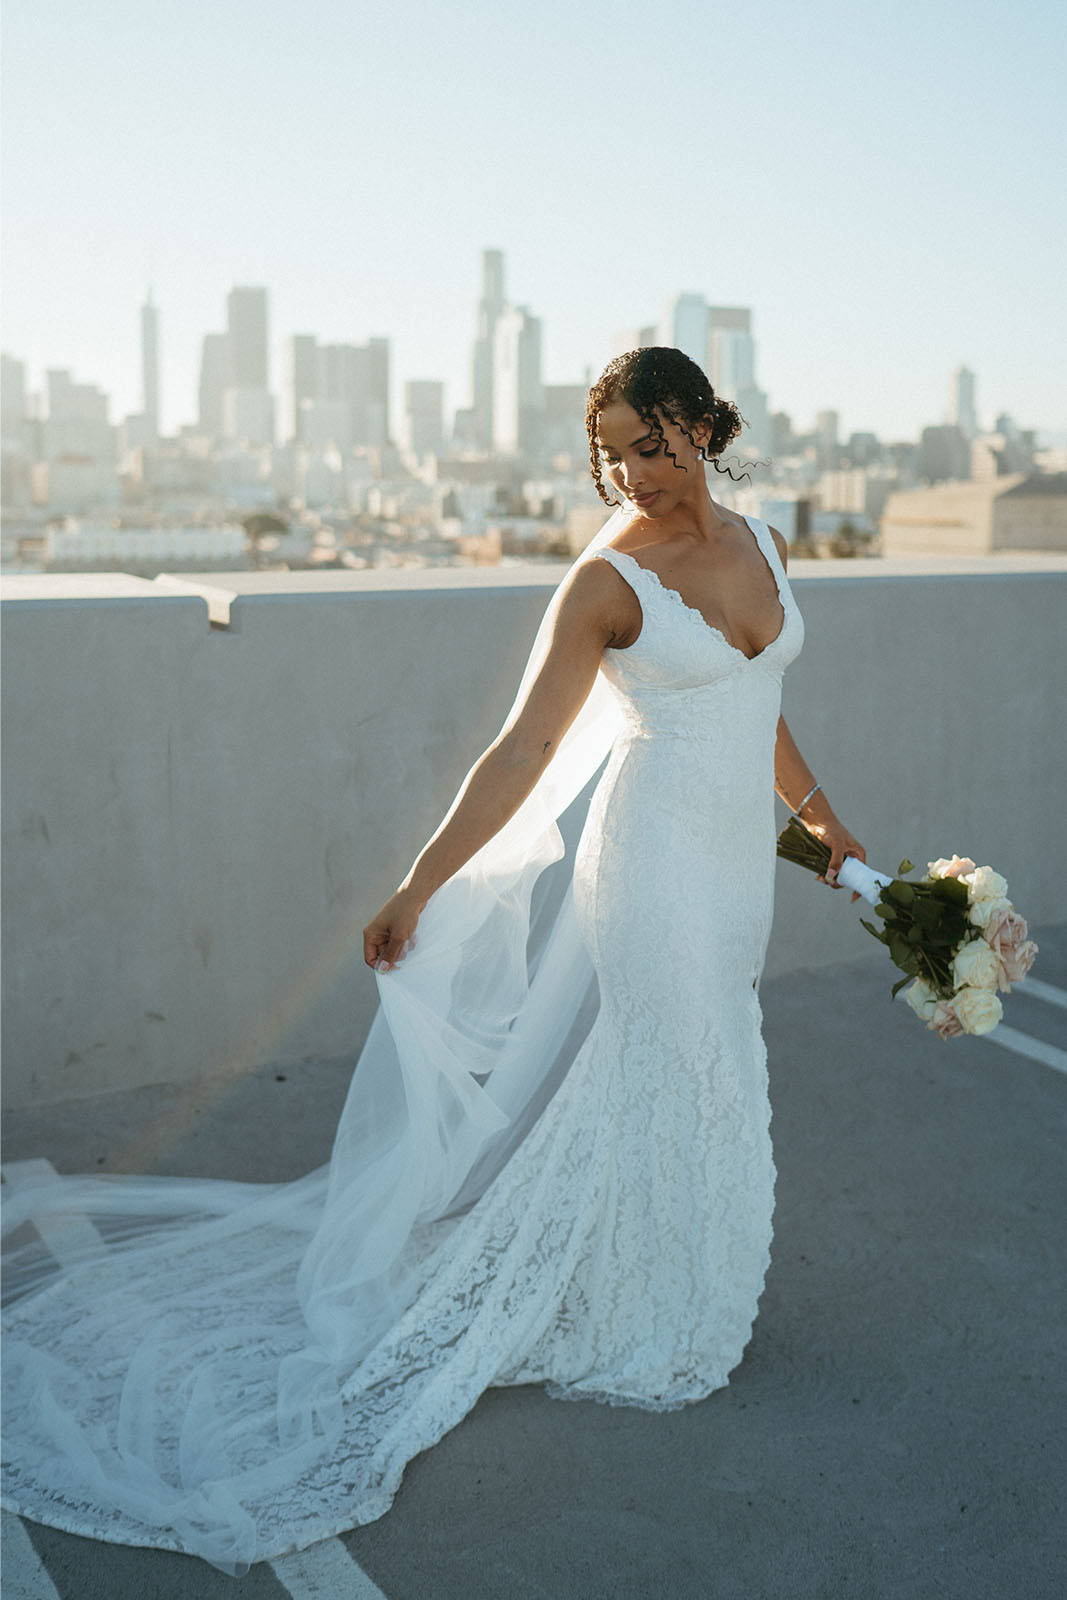 Bride wearing the Lumi gown